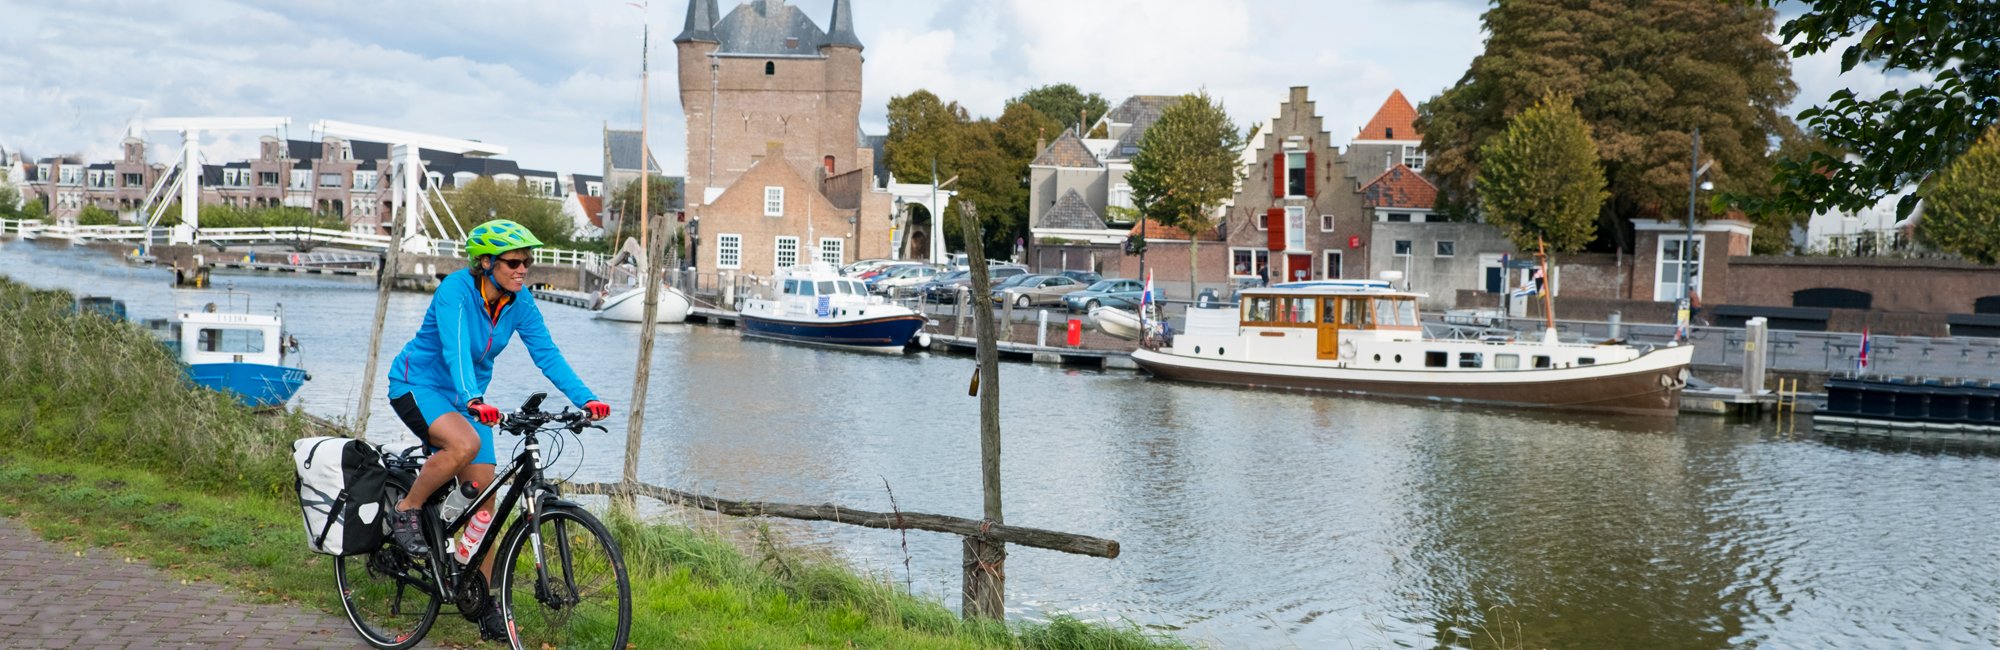 cycle tours holland nl